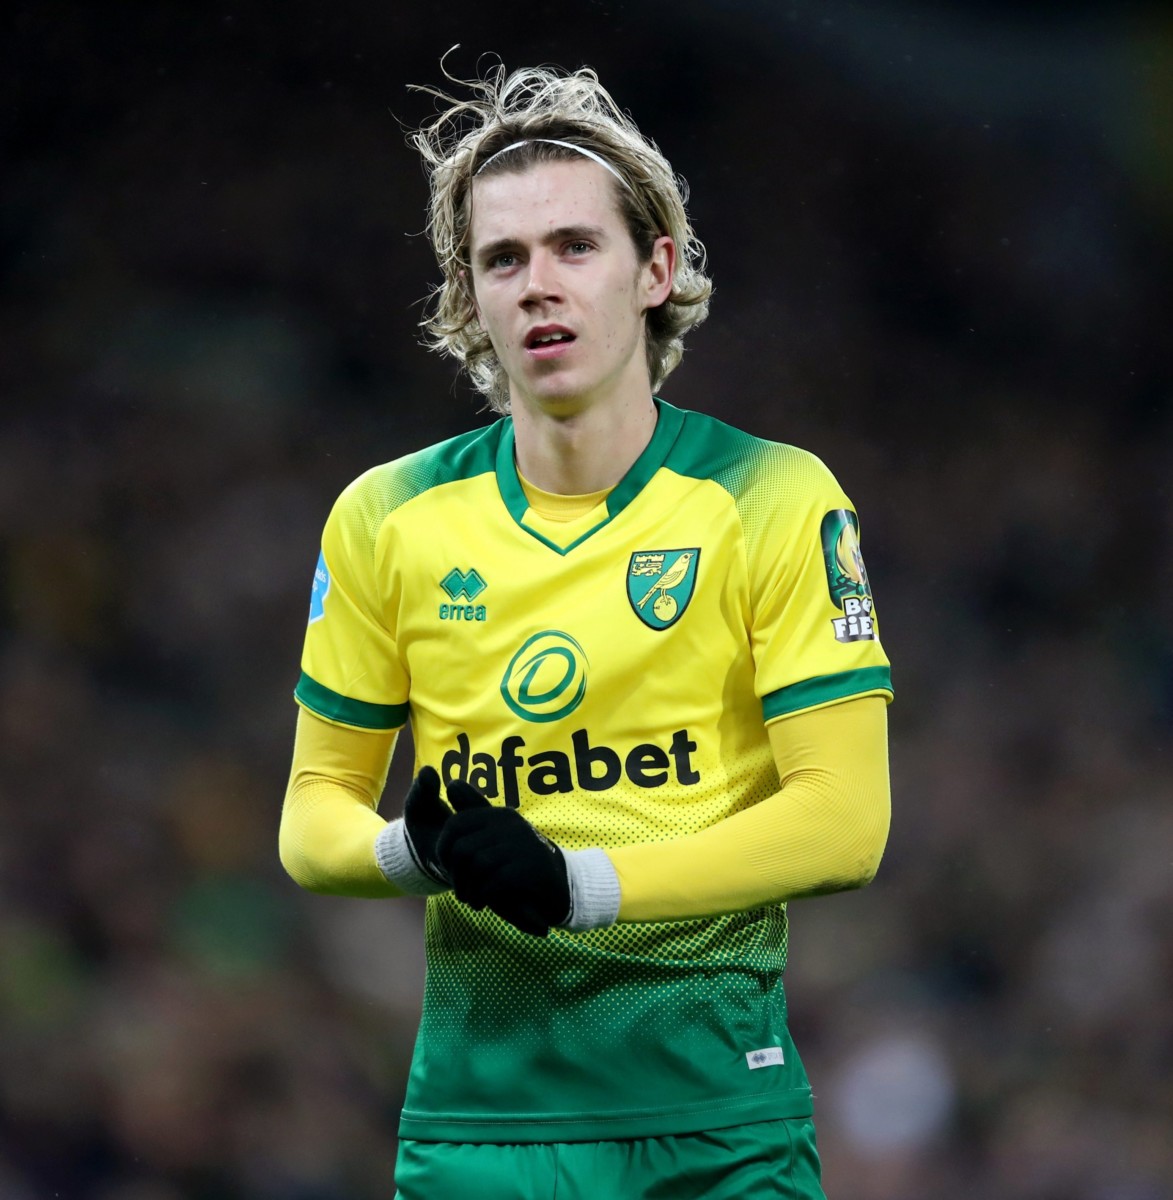 , Man Utd still planning summer transfer move for West Hams Rice along with Grealish and Norwich pair Cantwell and Aarons